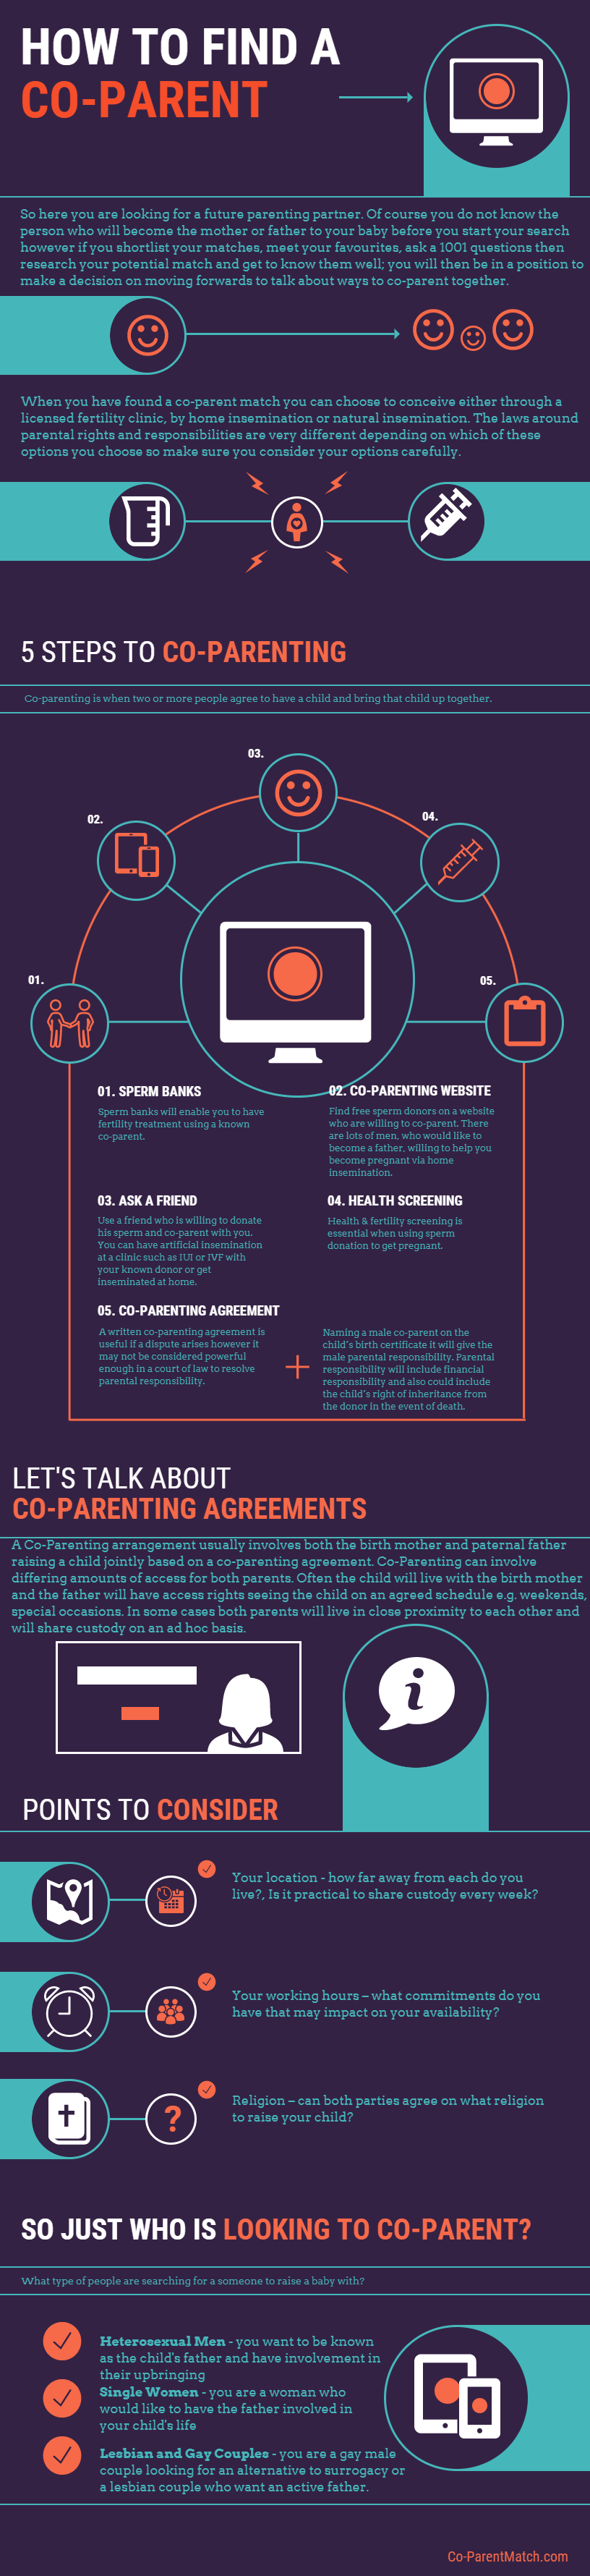 How to find a co-parent